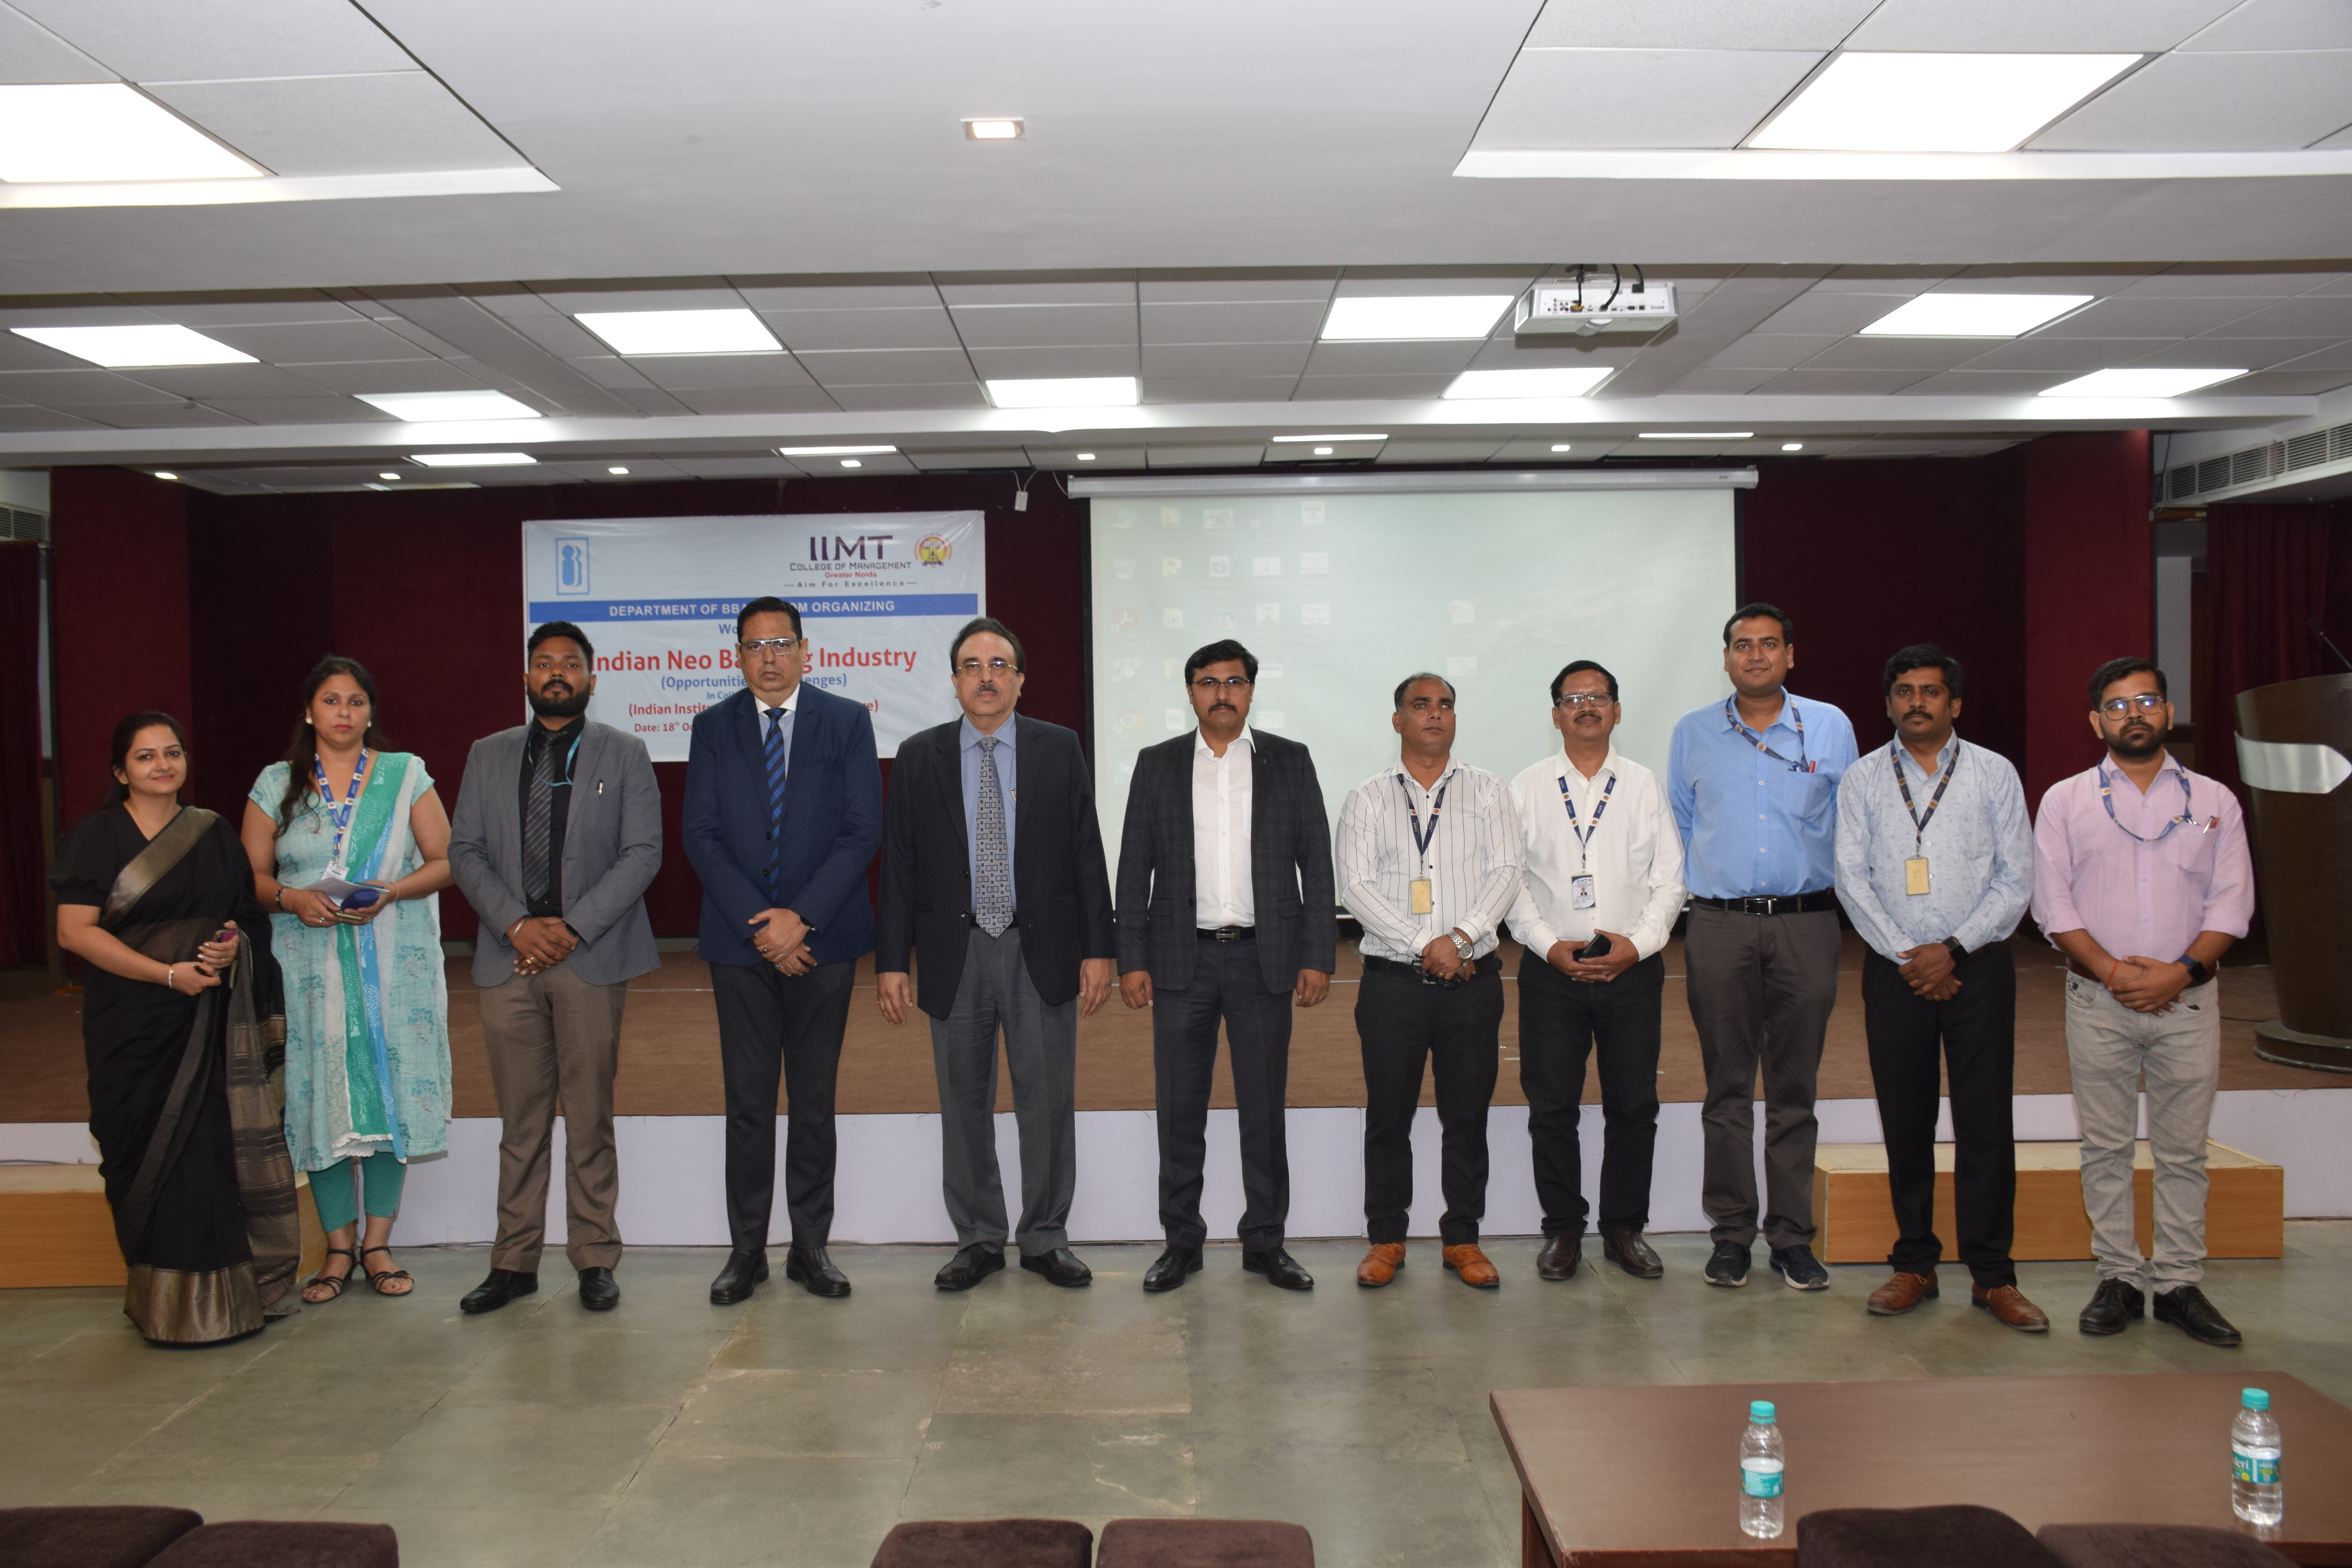 Workshop on Indian Neo Banking Industry